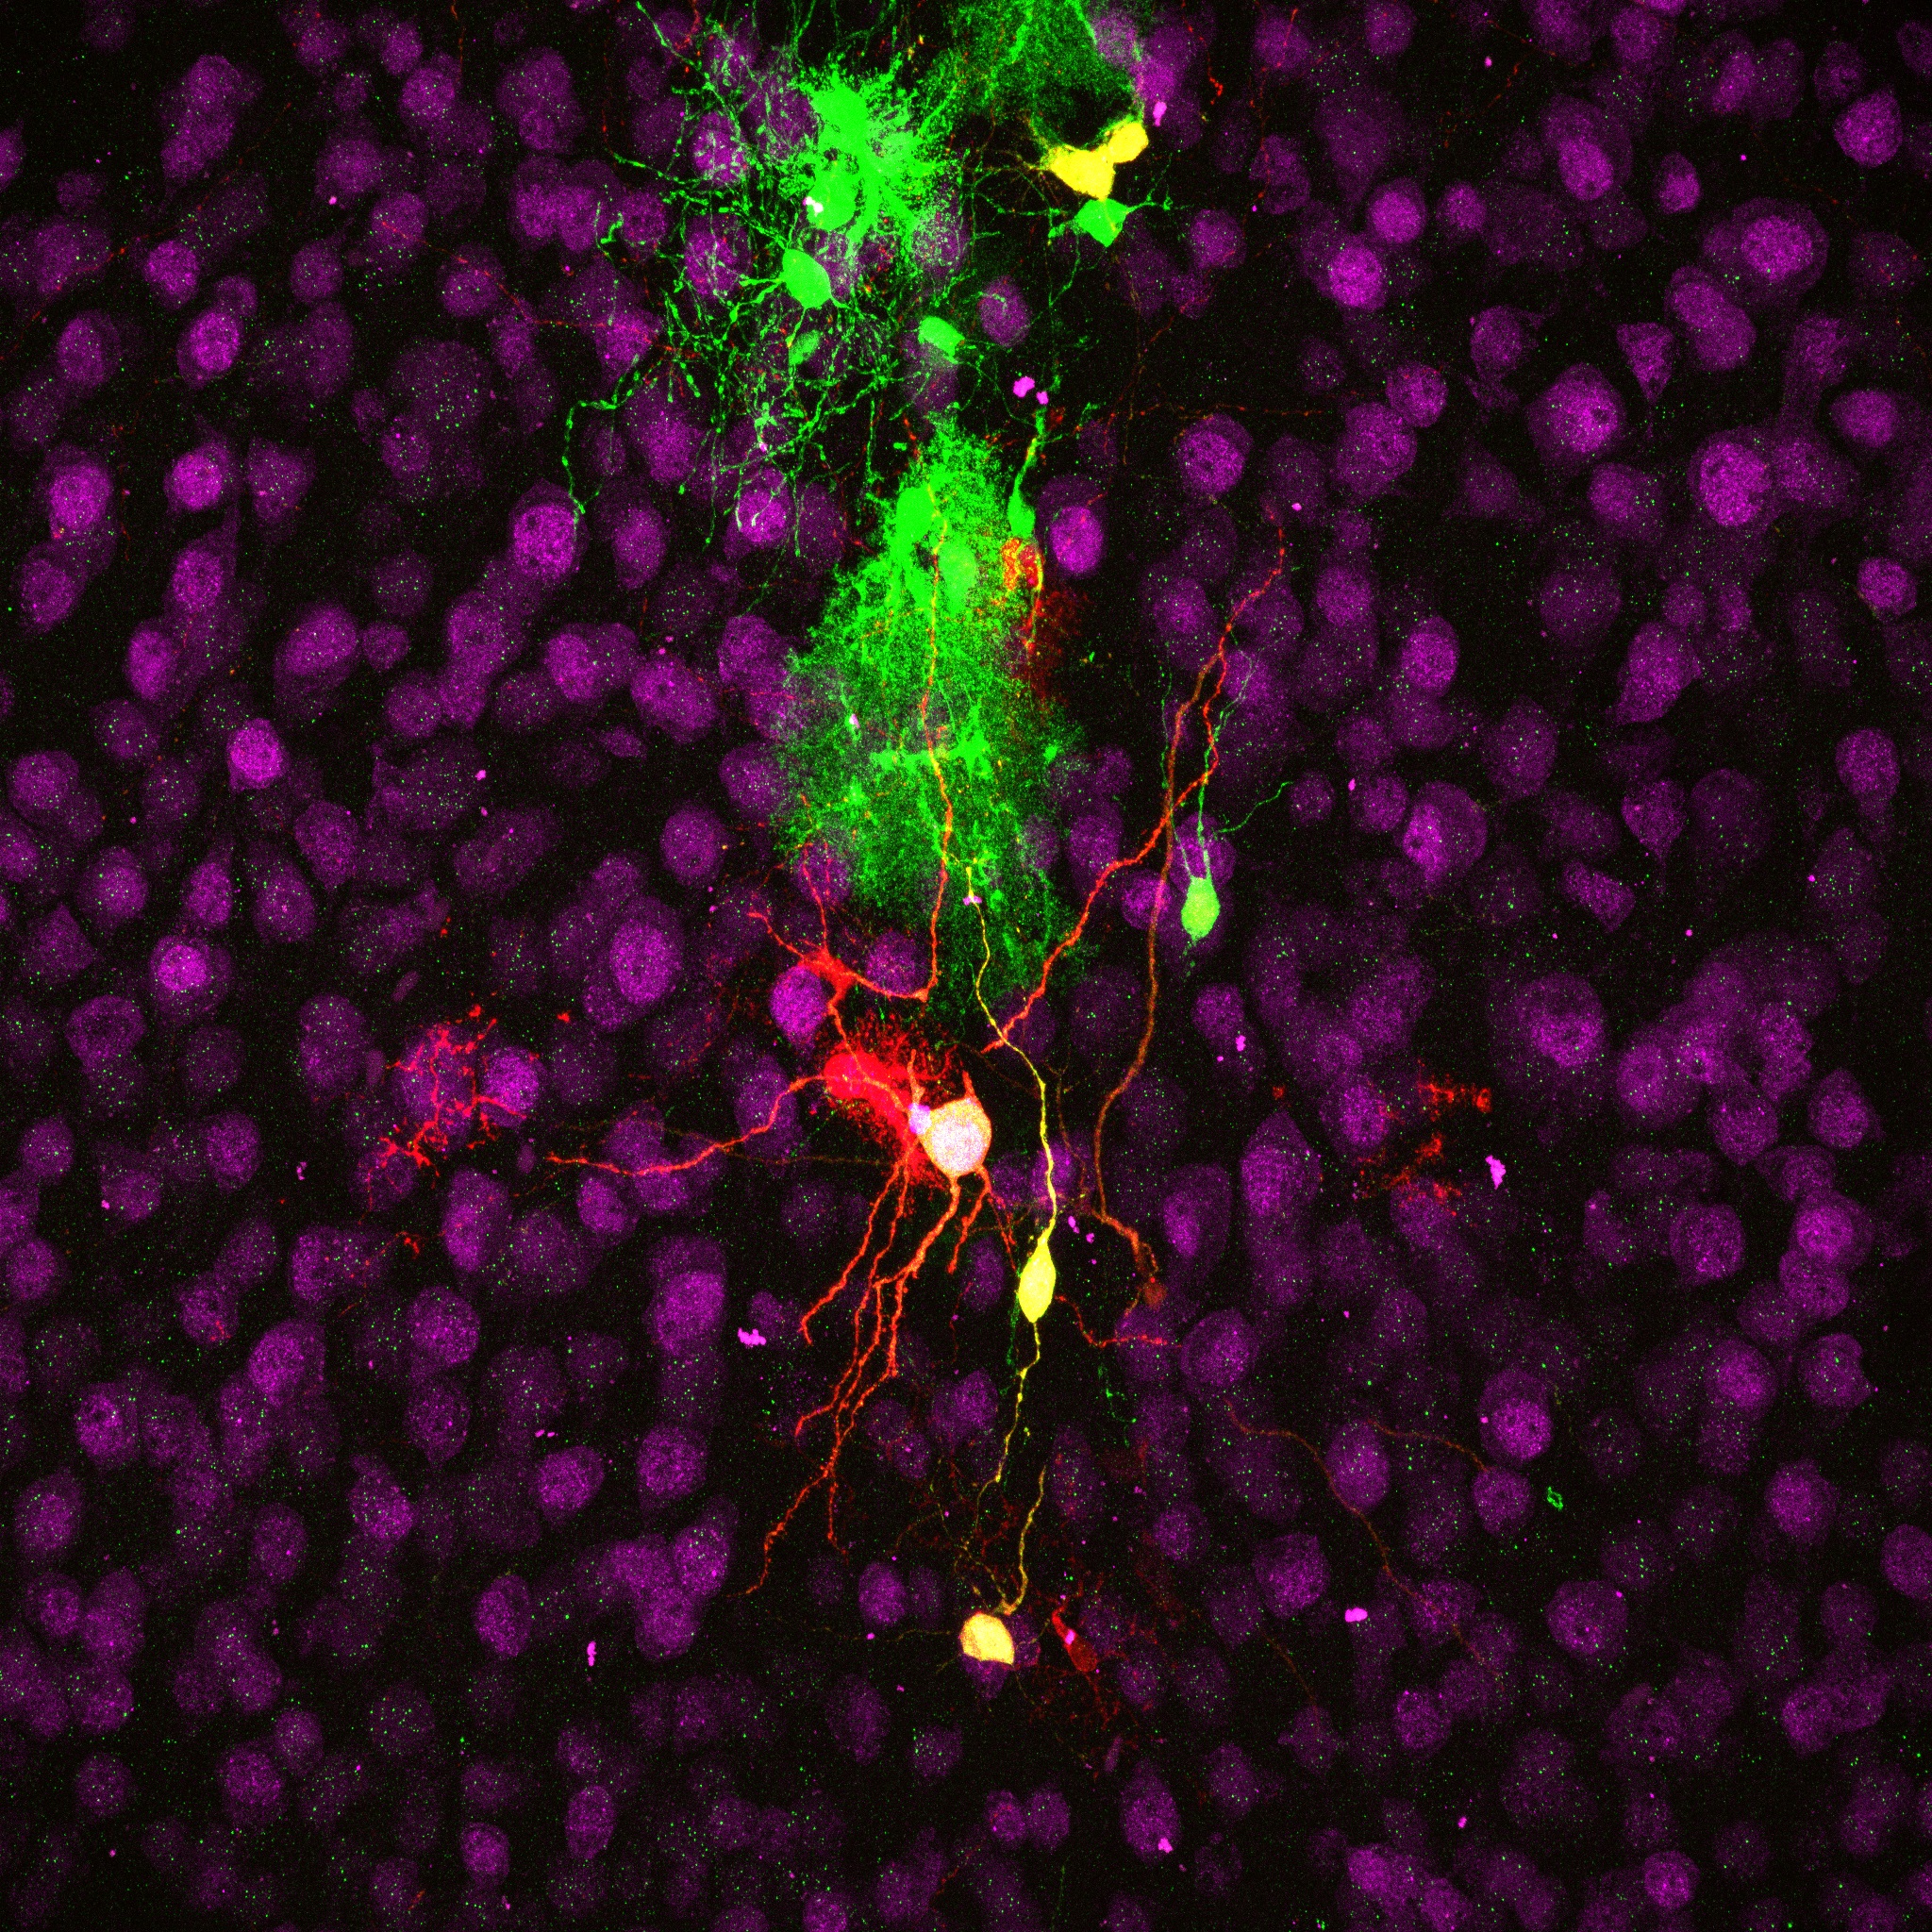 Induced neurons (in yellow) and glial cells (in red and green) in the cerebral cortex of a mouse